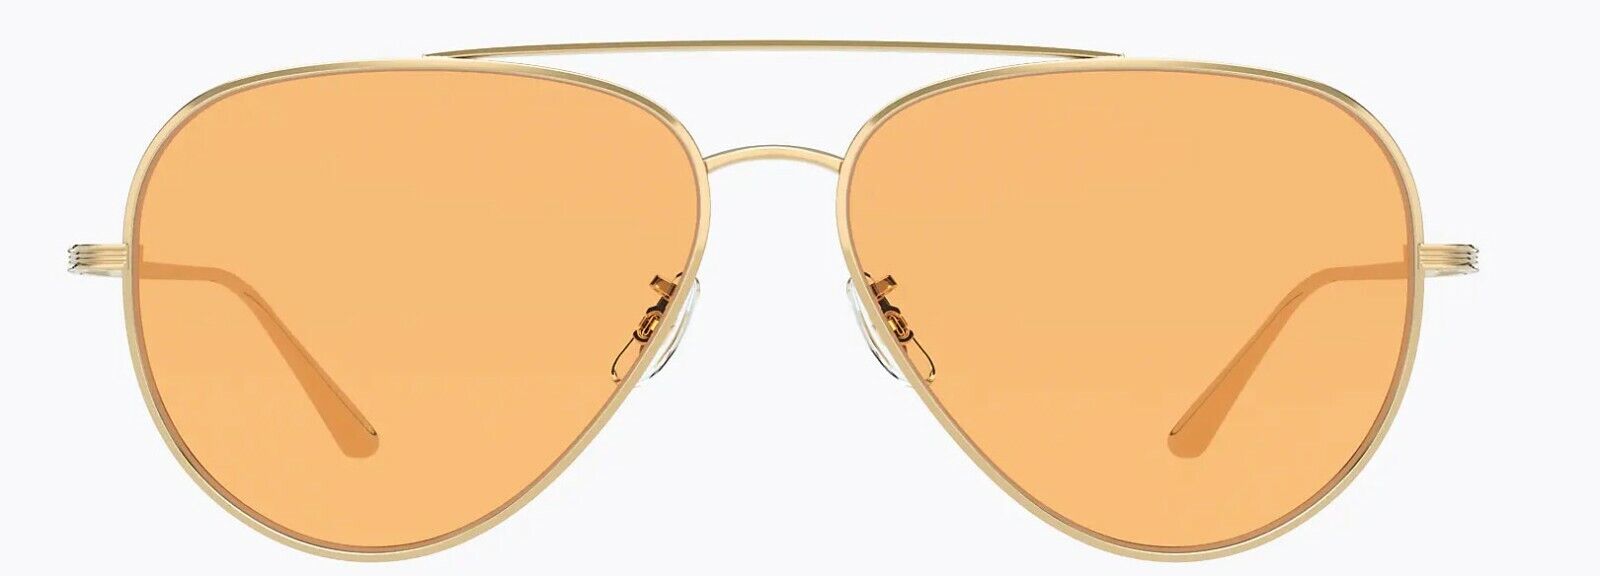 Oliver Peoples Sunglasses 1277ST 5292V9 The Row Casse Gold /Tangerine Photo 61mm-827934450950-classypw.com-2